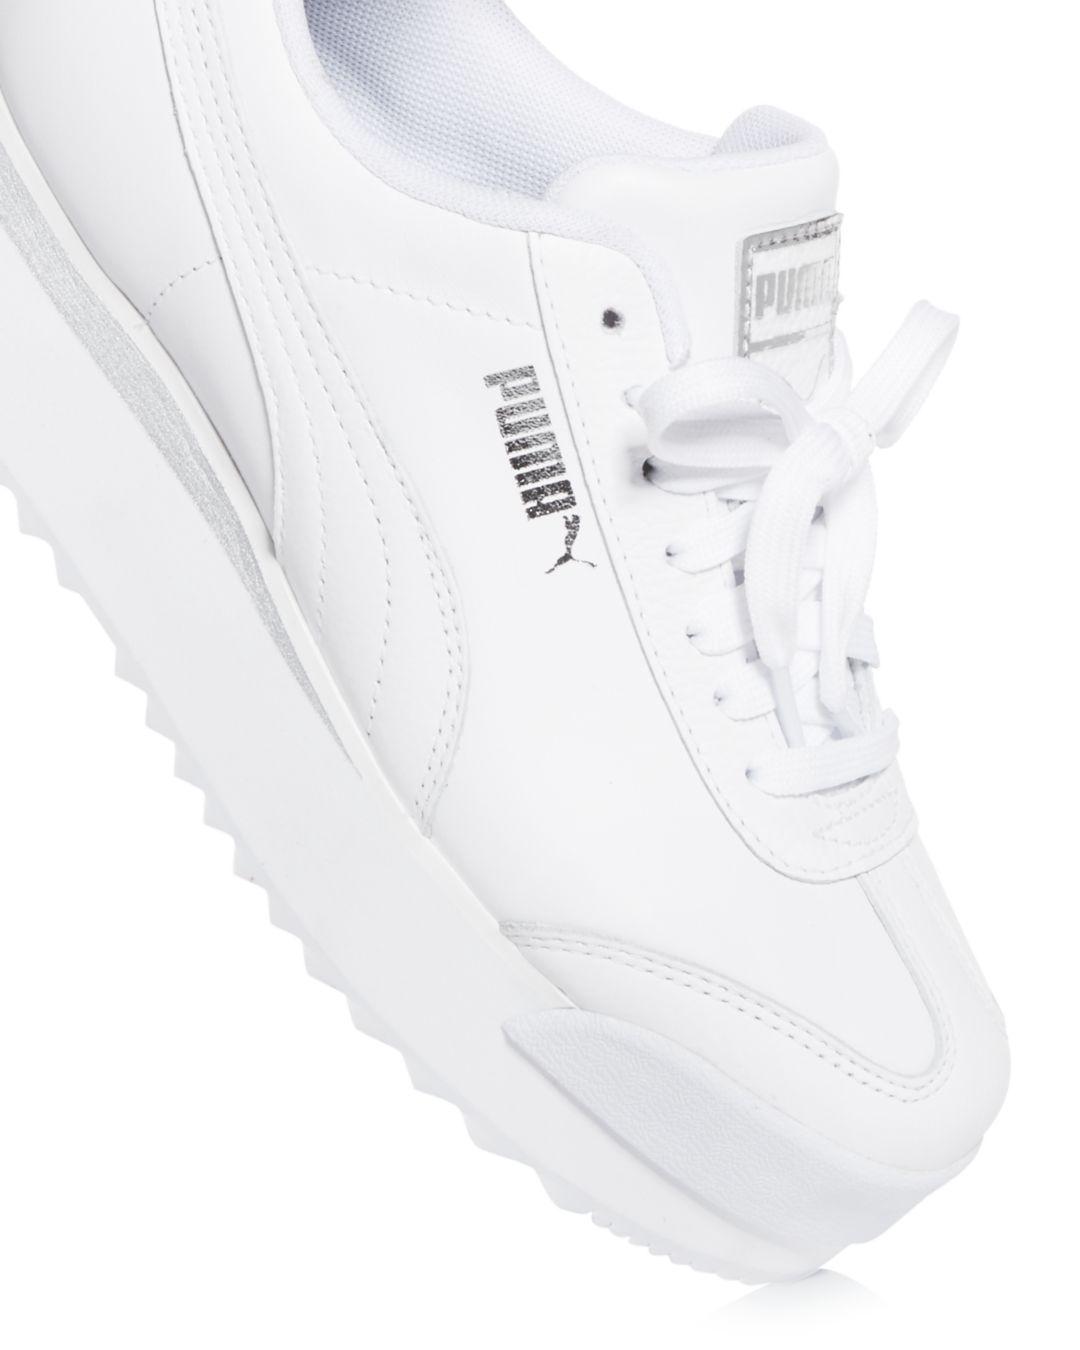 PUMA Leather Women's Roma Amor Platform Sneakers in White - Lyst